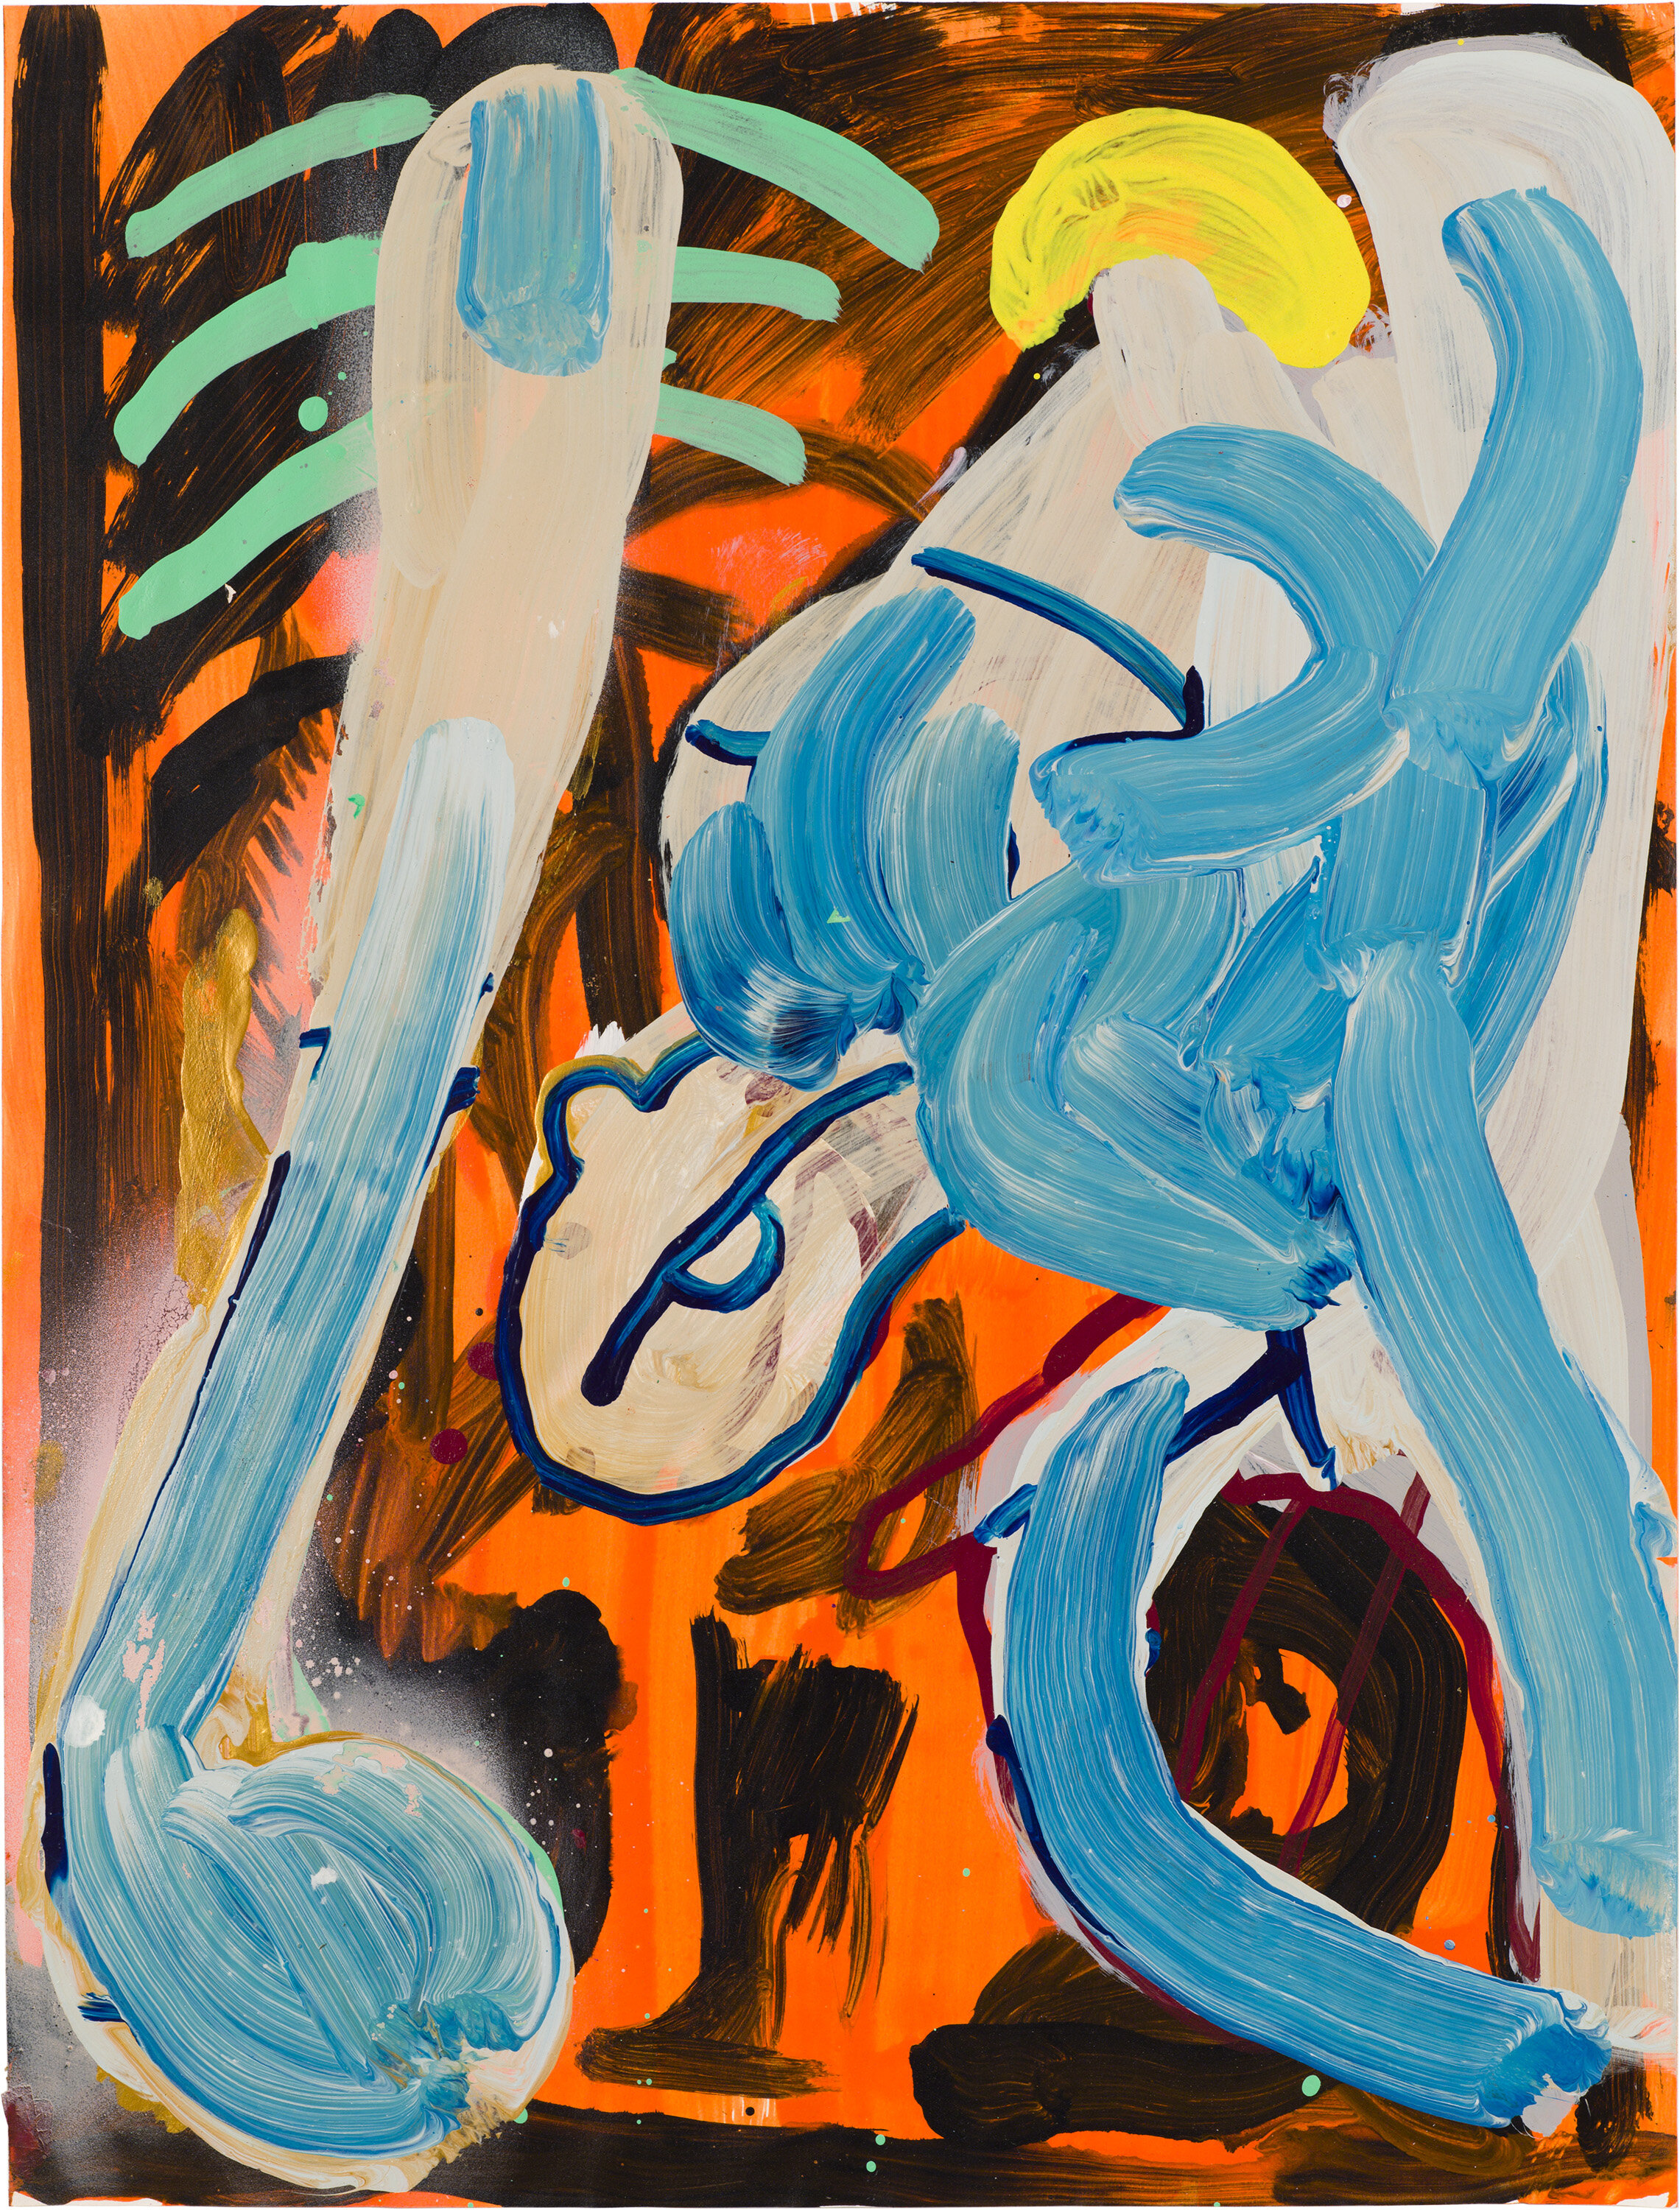  Drew Beattie and Ben Shepard   DBBS-DRW-2015-281   2015  acrylic and spray paint on paper  24 x 18 inches 